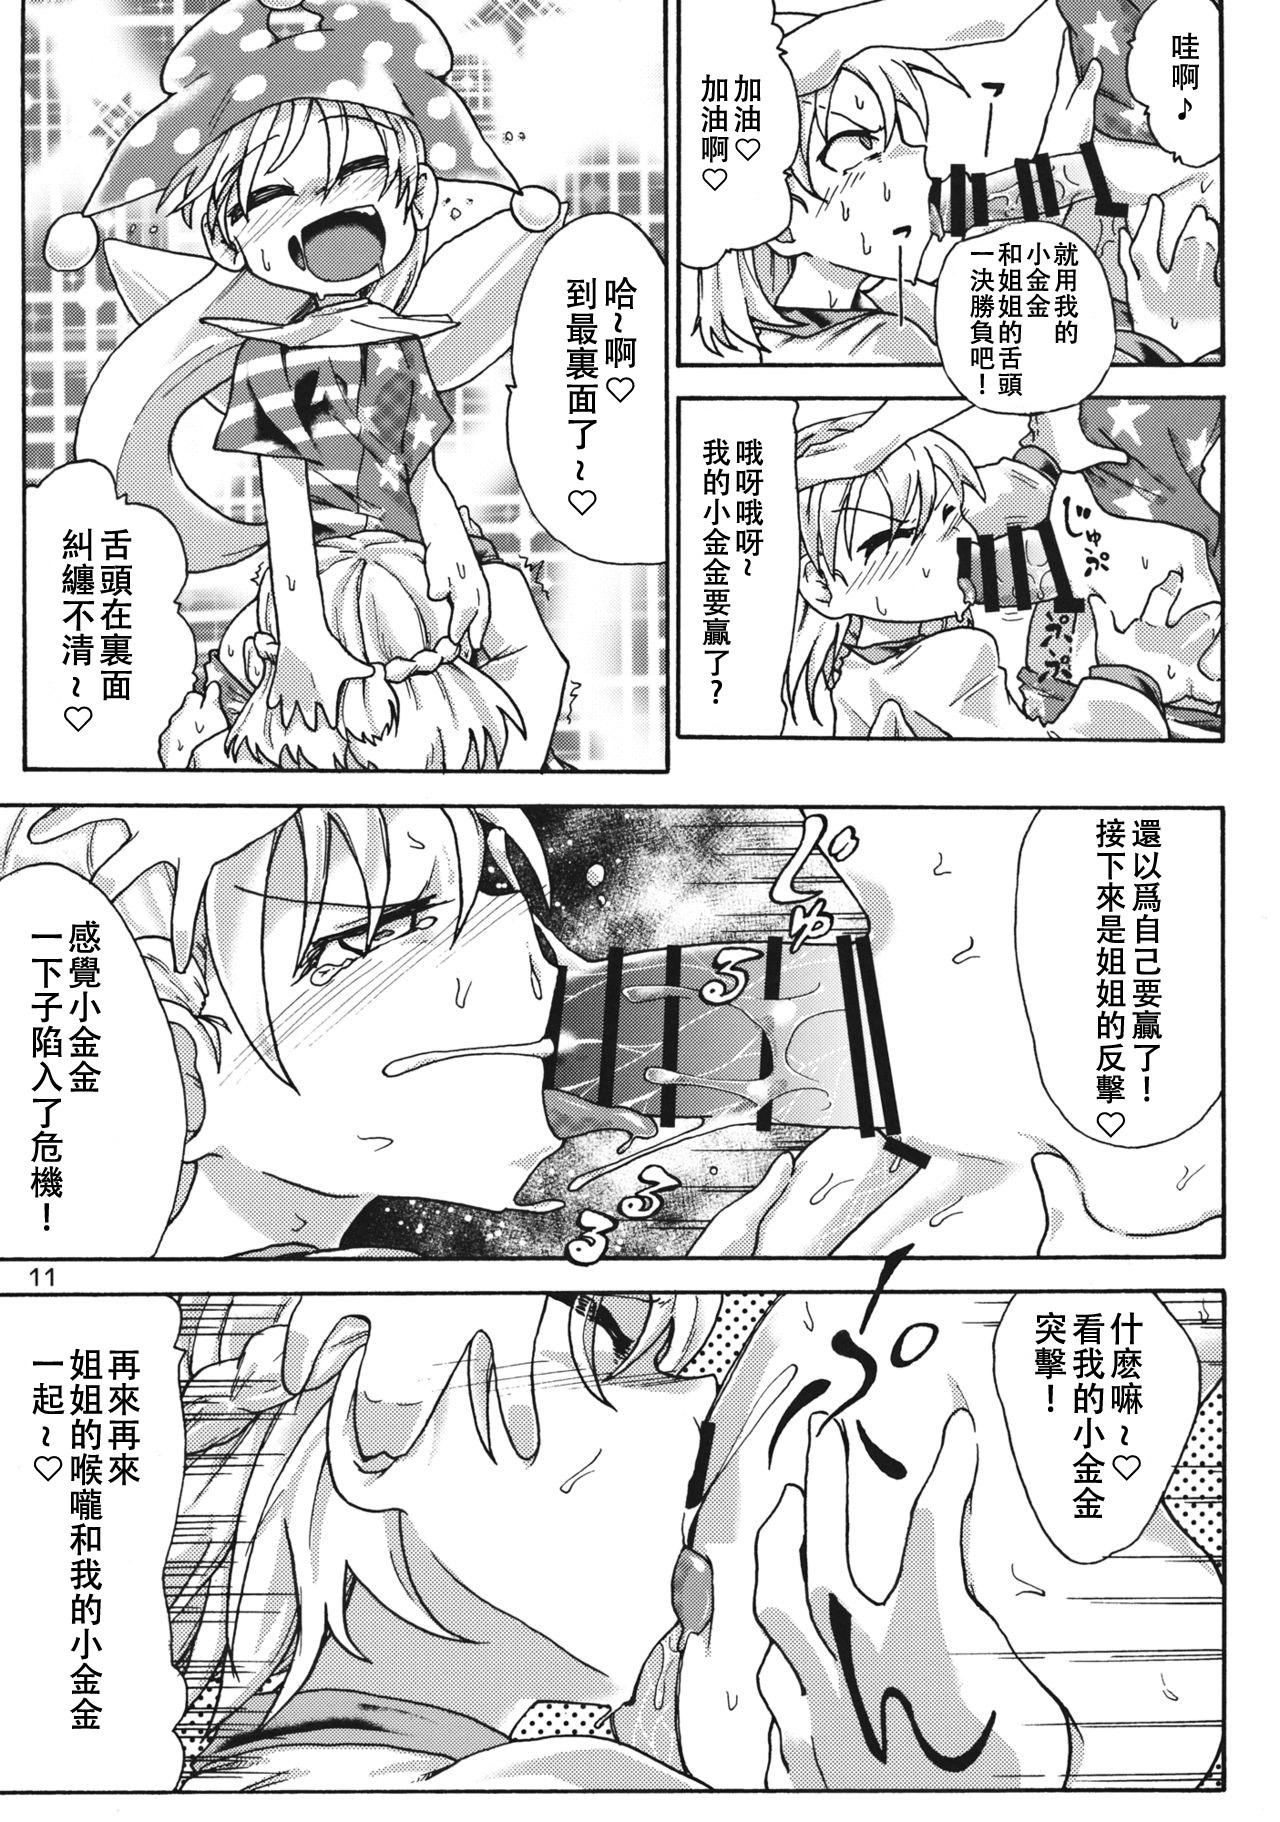 Old Vs Young Creeping! - Touhou project Hoe - Page 10